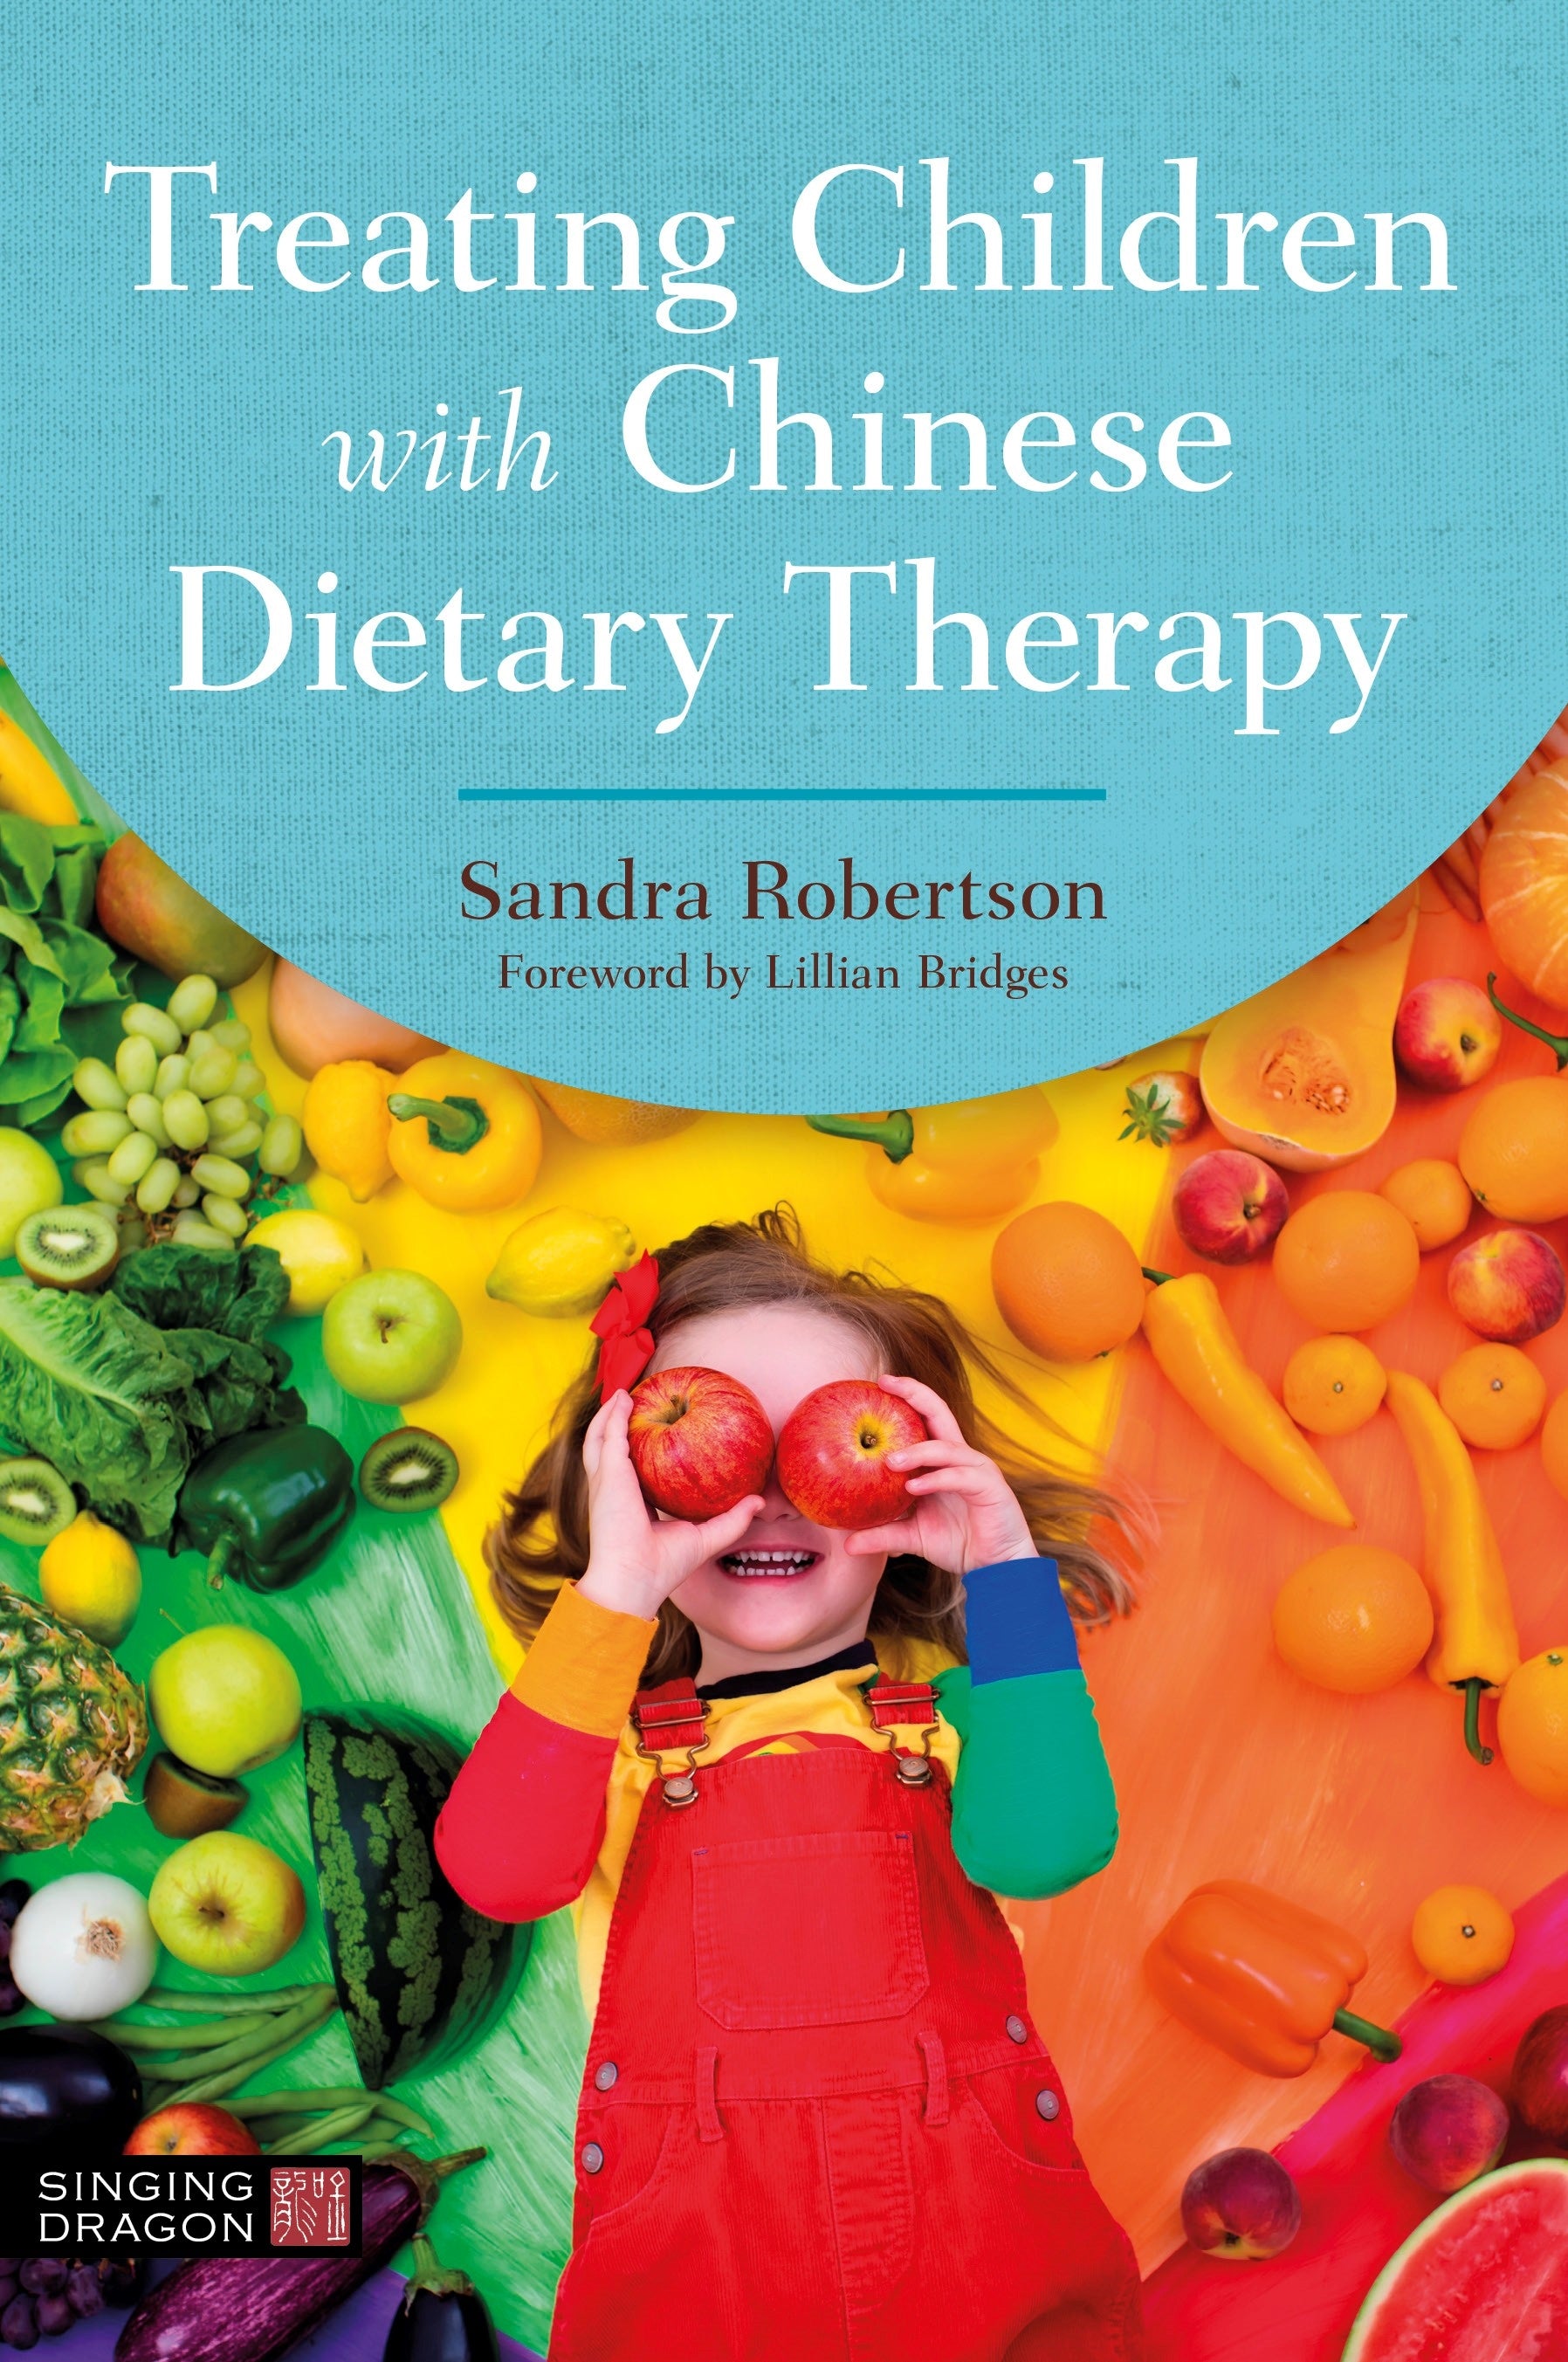 Treating Children with Chinese Dietary Therapy by Lillian Bridges, Sandra Robertson